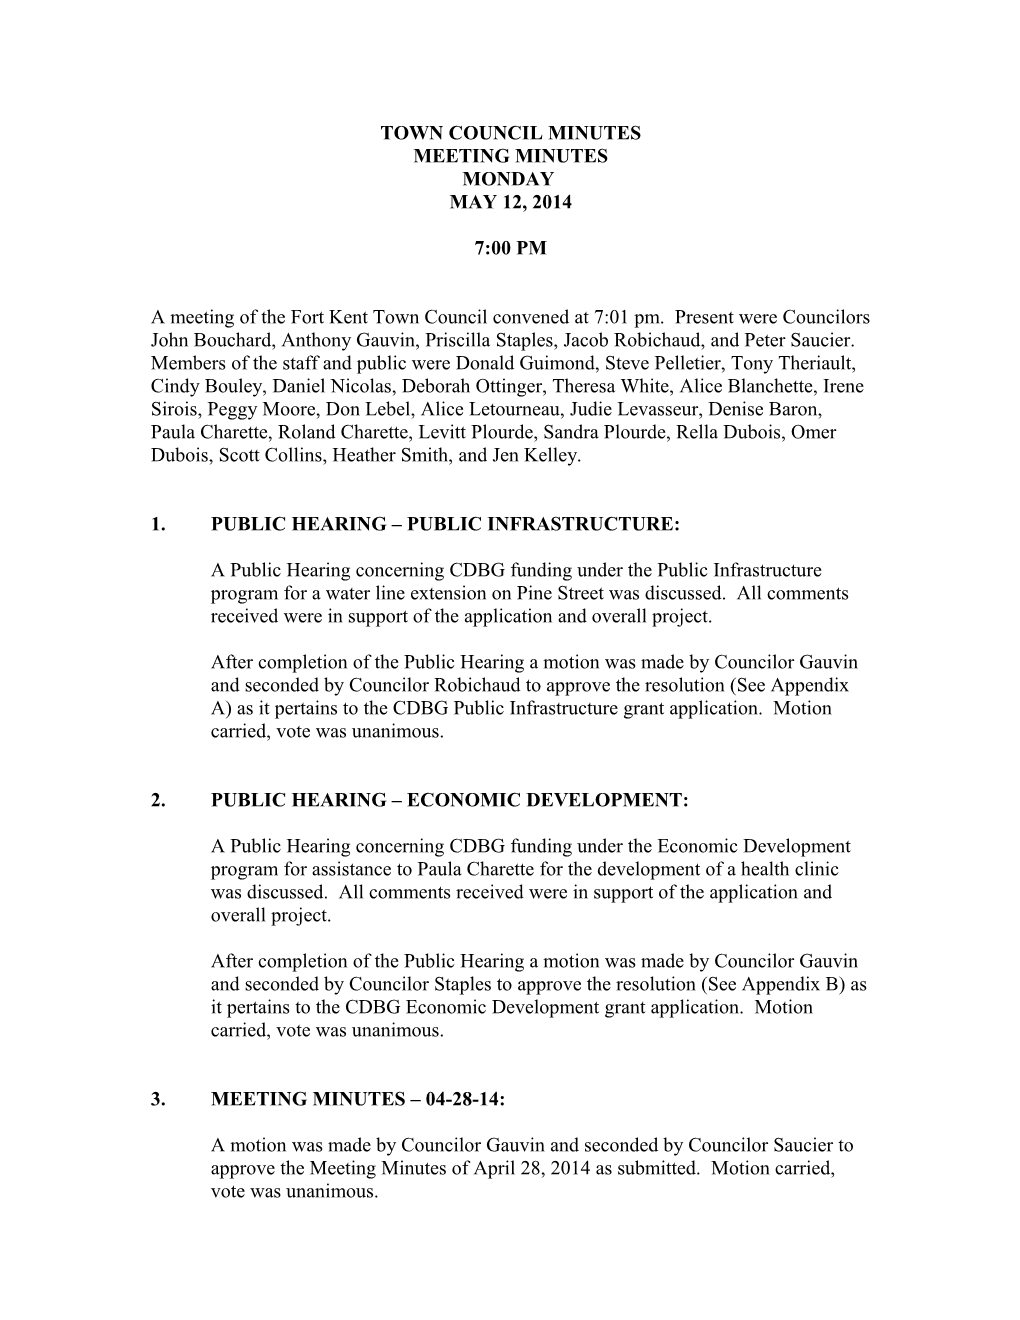 Town Council Minutes s1